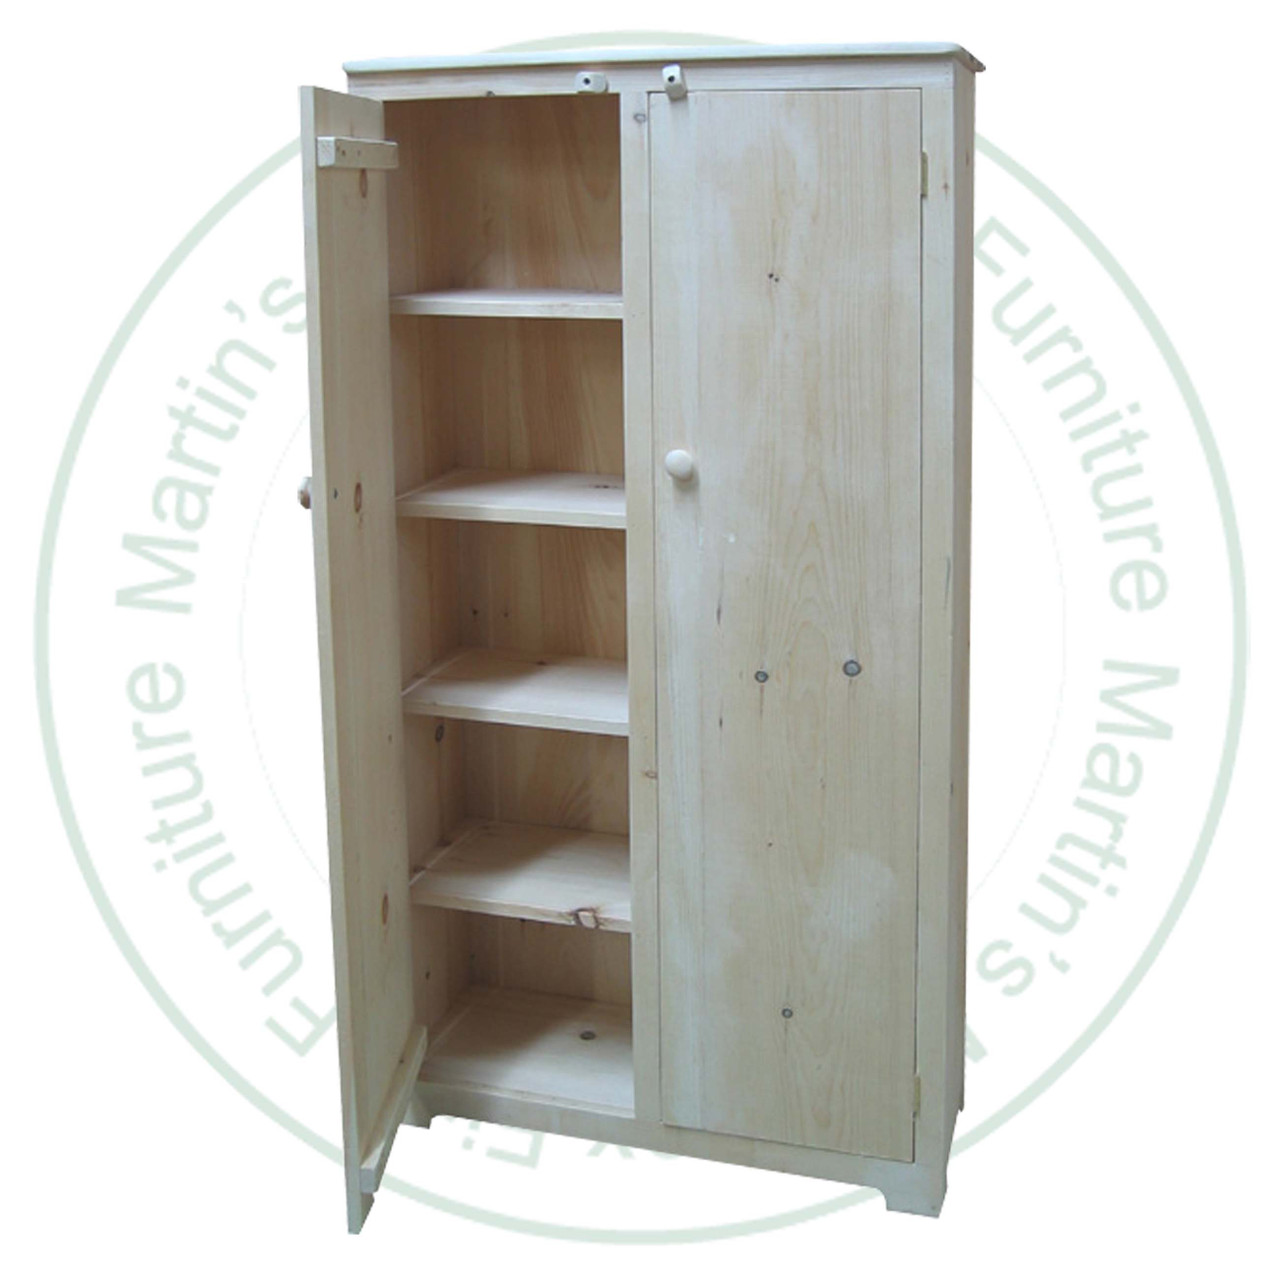 Maple Nith River Jam Cupboard 12''D x 32''W x 72''H With 2 Doors